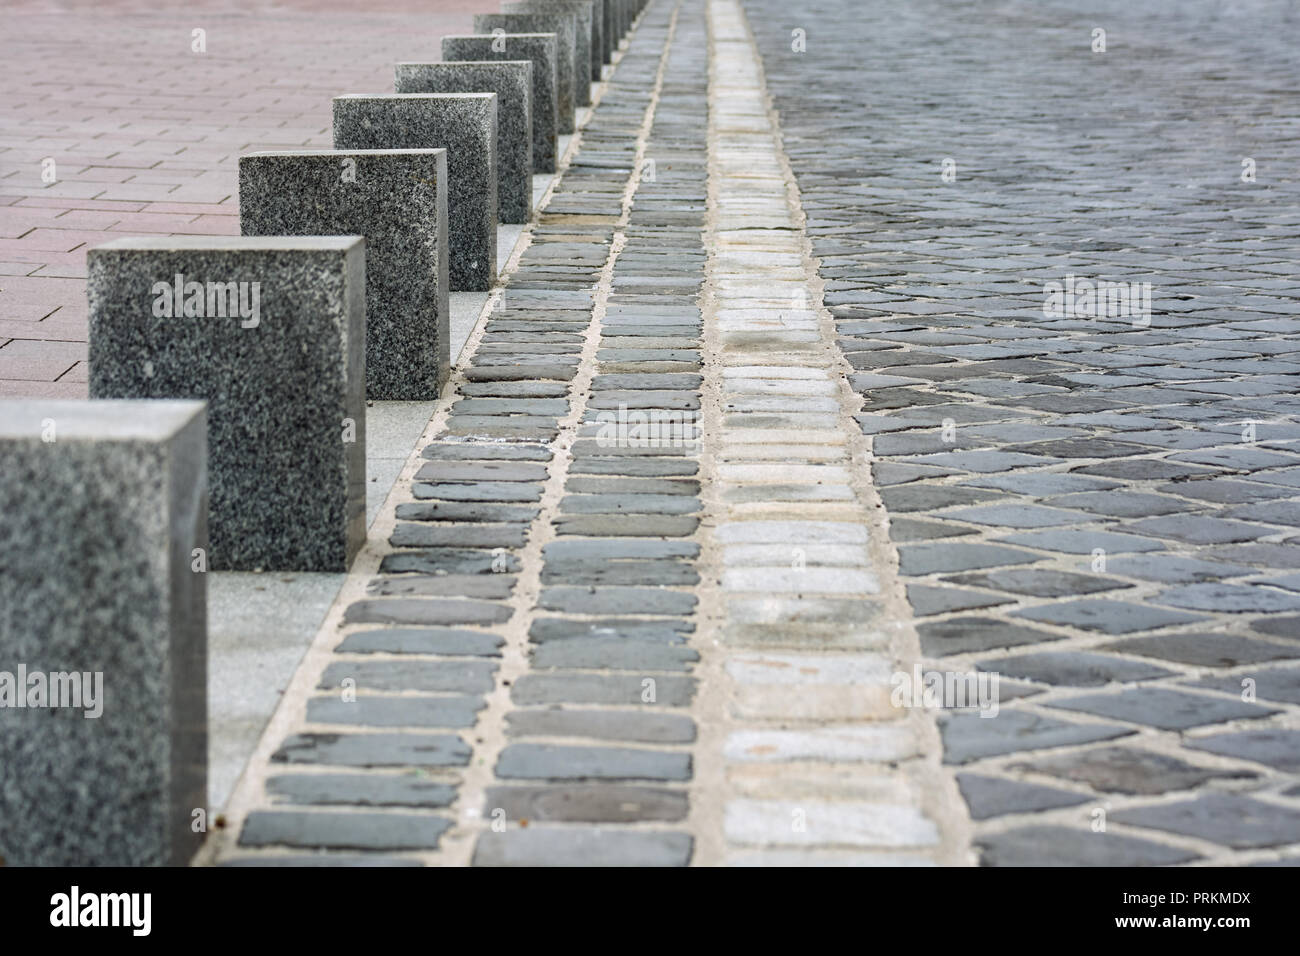 Columns of gray marble on the pavement lined with gray stone and red tiles. Stock Photo